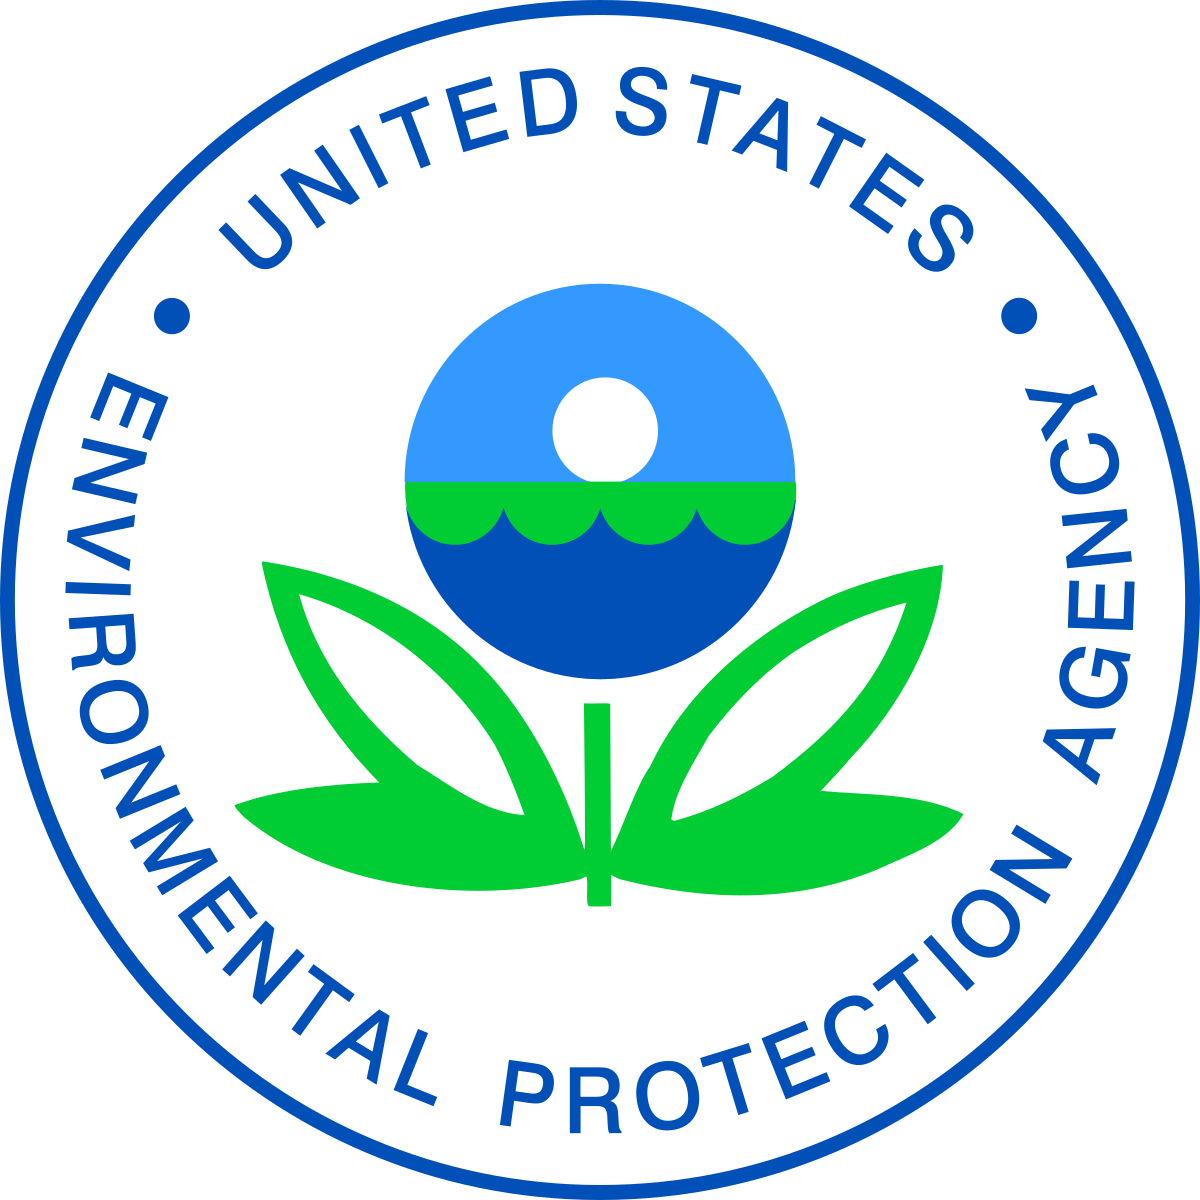 Emblem with circular text, "United States Environmental Protection Agency" around an illustration of a flower of the sun, grass and water in it and leaves below.